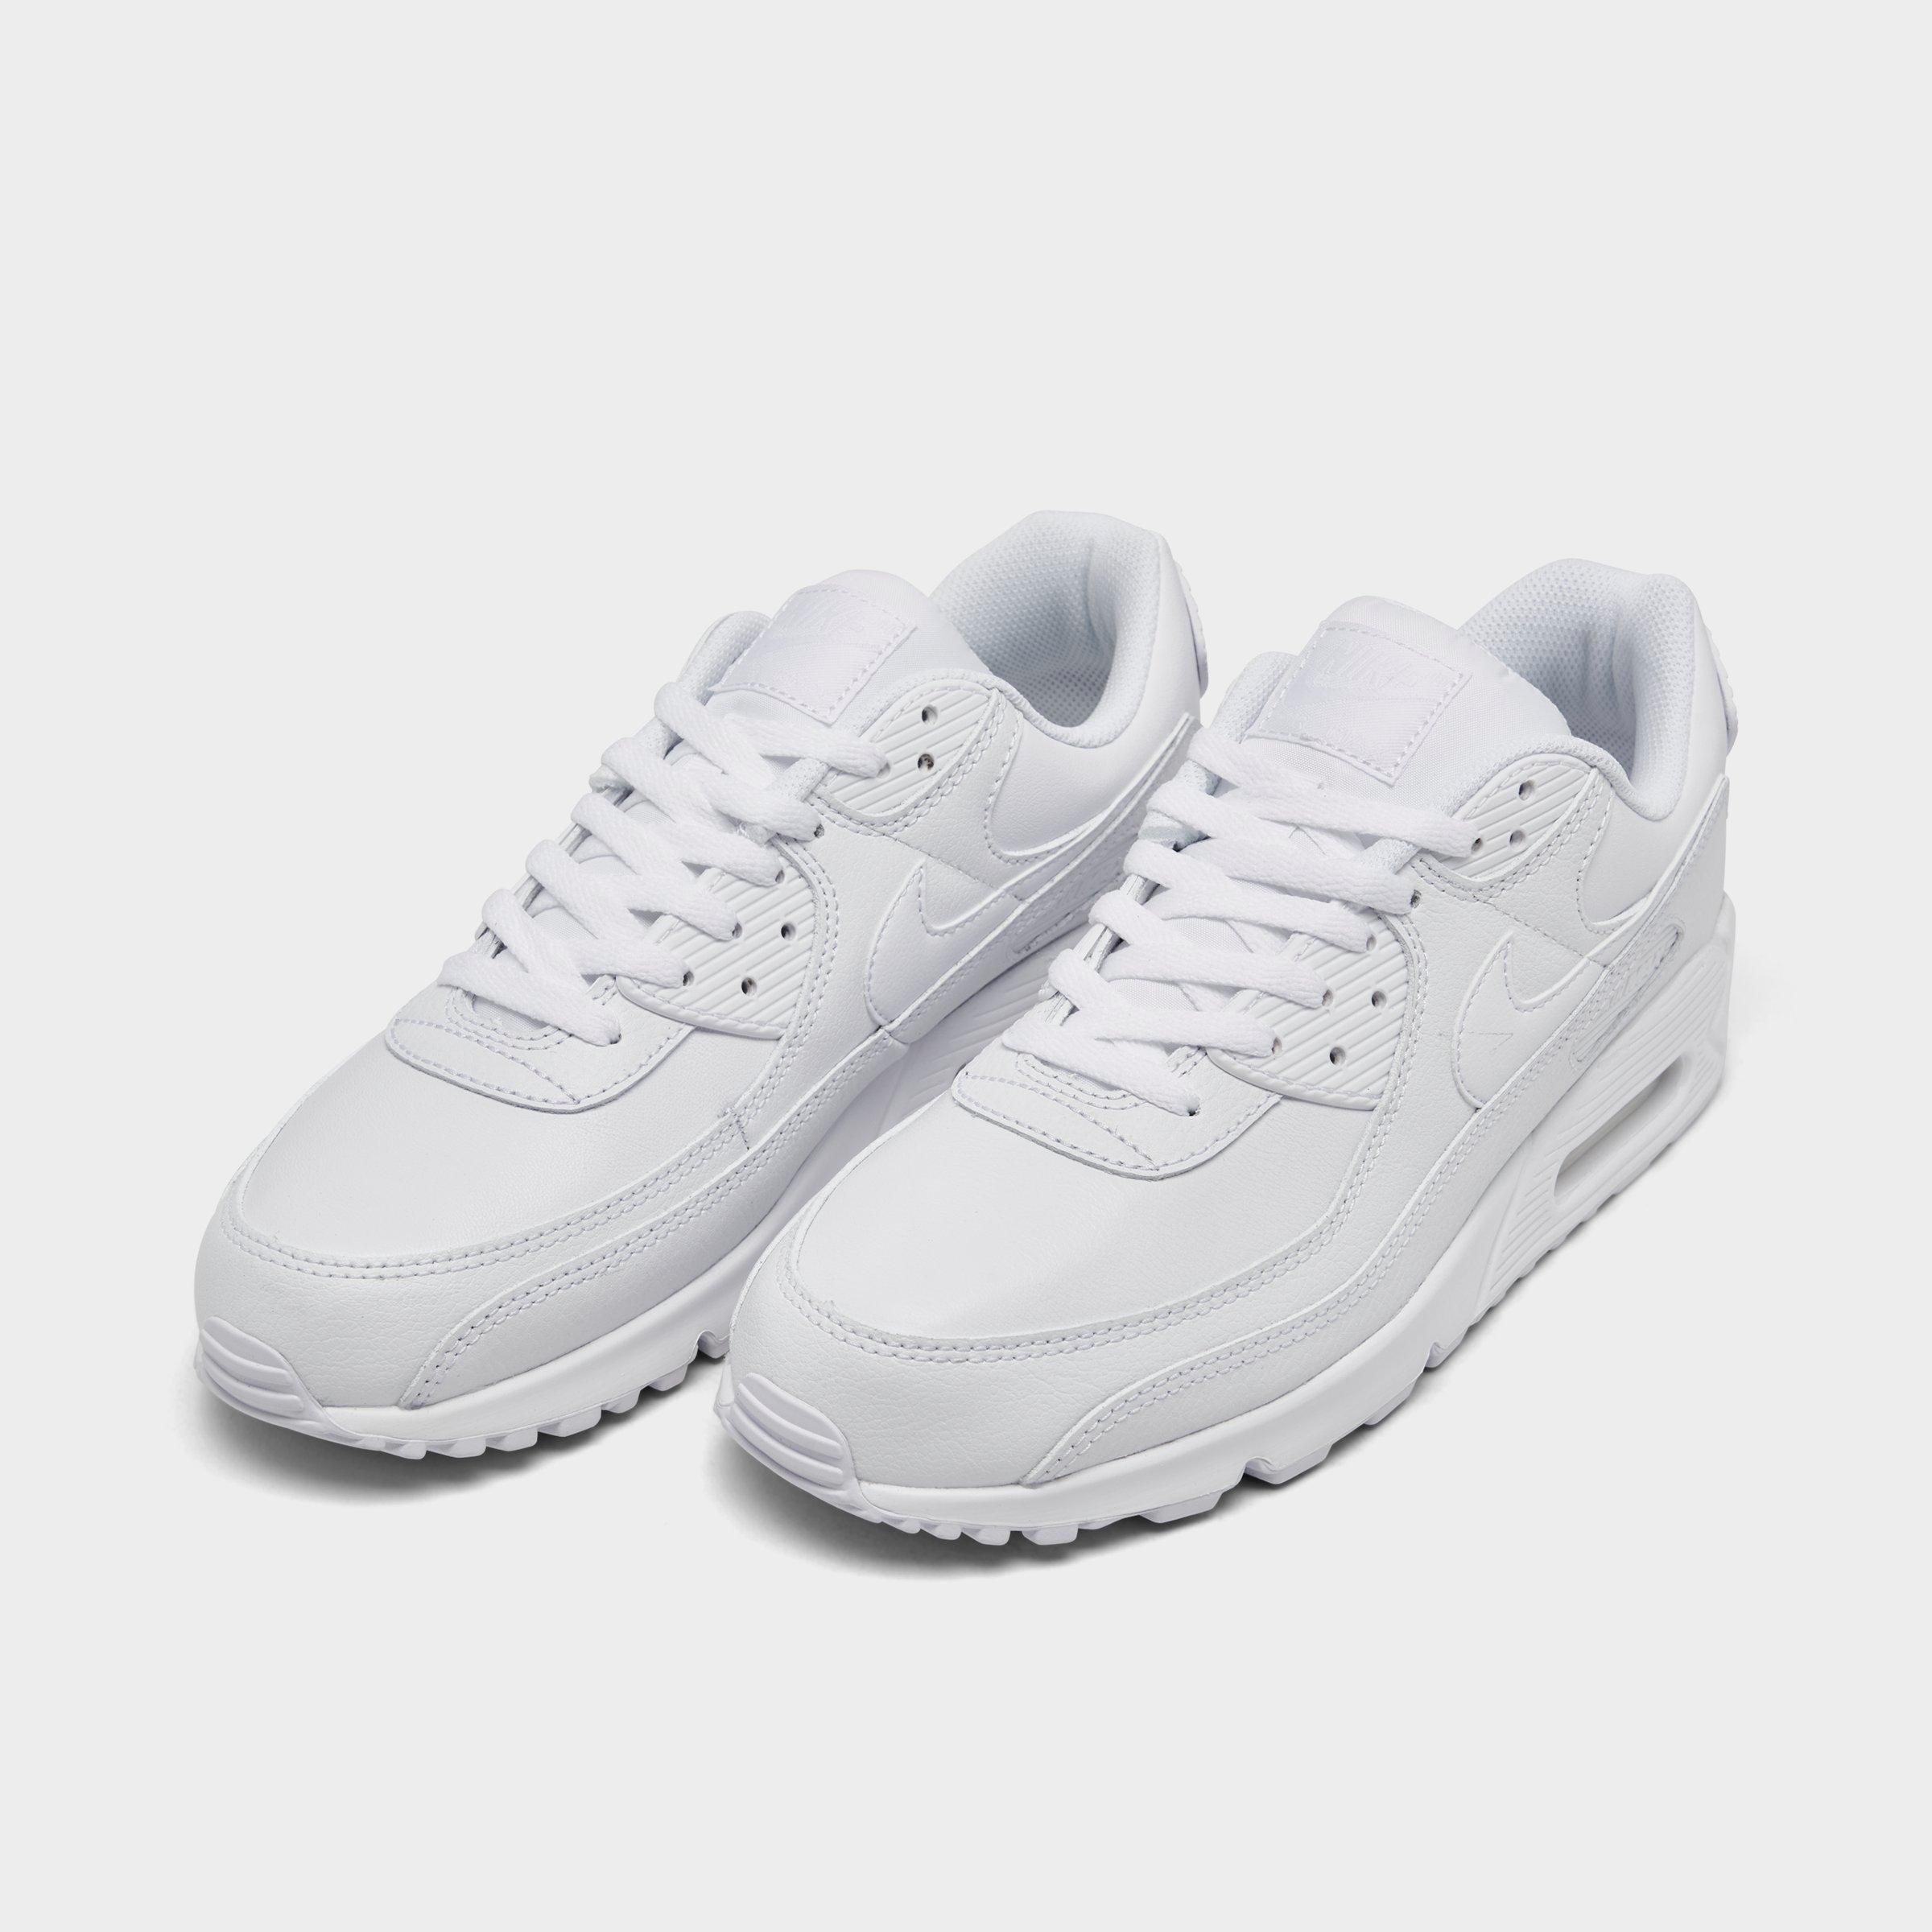 air max 90 white leather men's